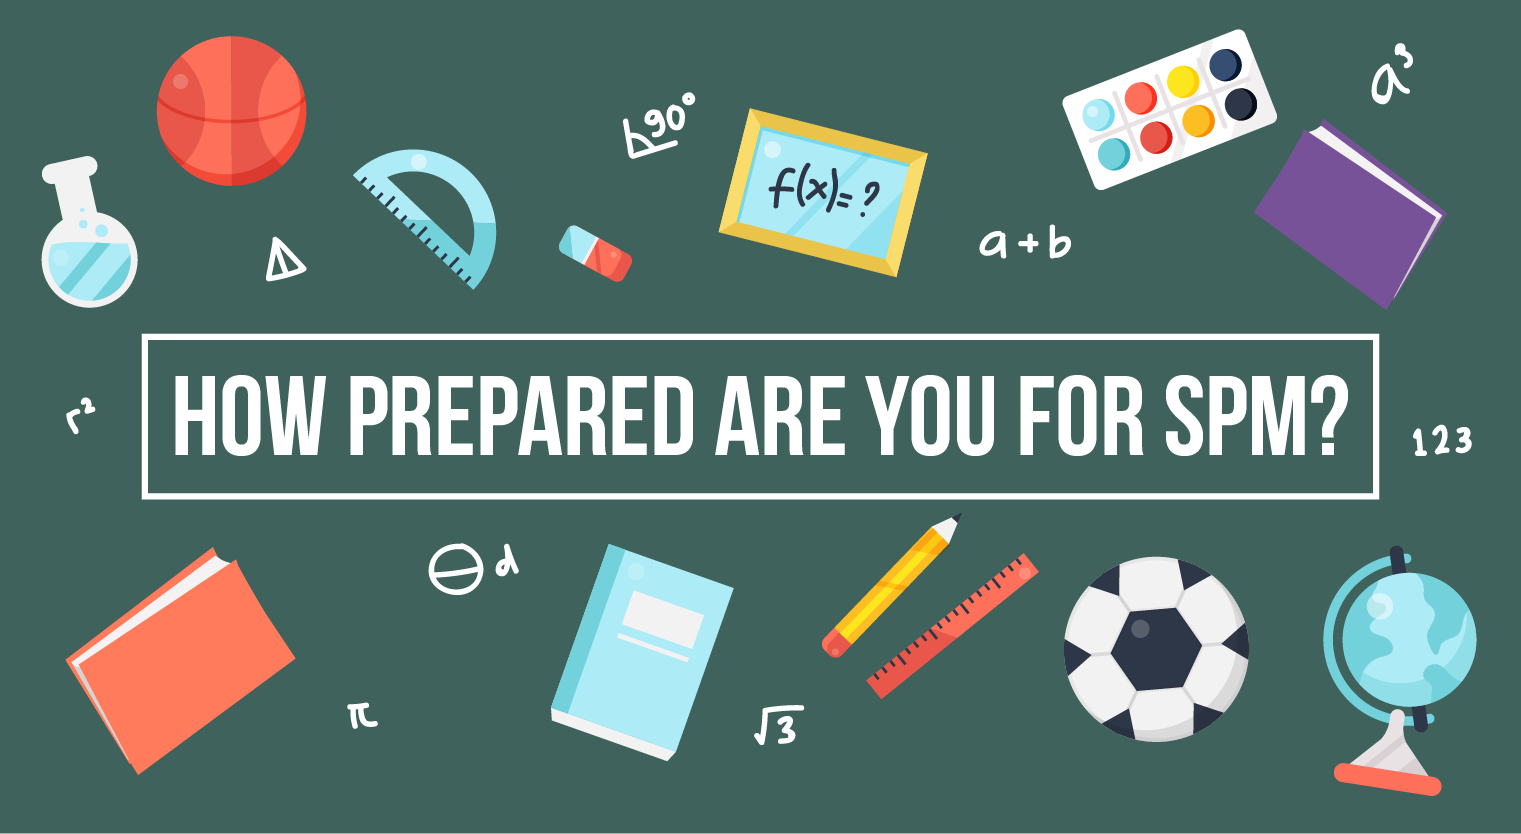 Quiz: How Prepared Are You for SPM? %%page%% - Feature-Image